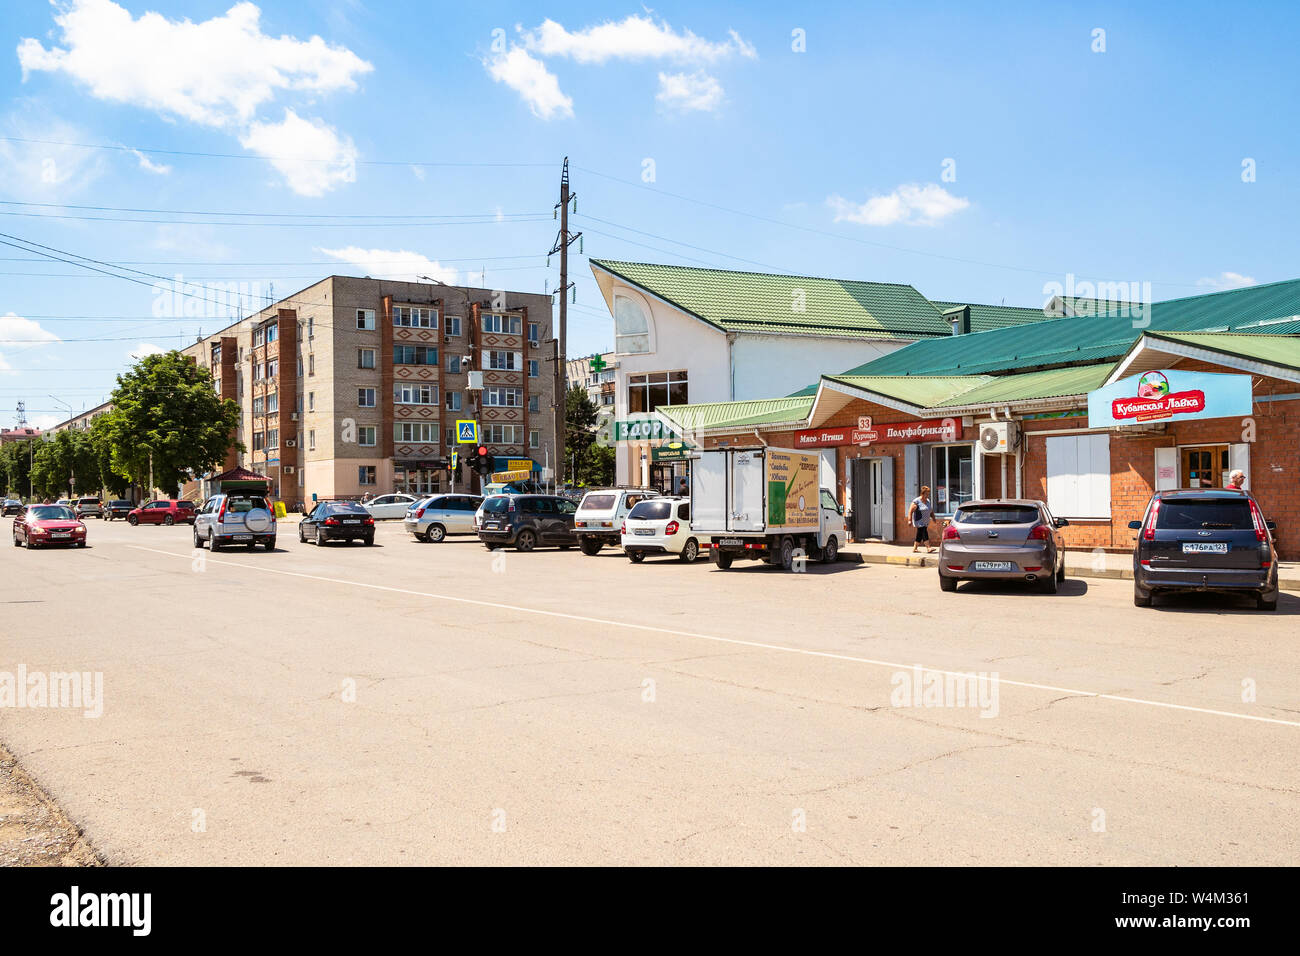 ABINSK, RUSSIA - JULY 9, 2019: car parking on square near city market on Komsomolskaya street in Abinsk city. Abinsk is town and administrative center Stock Photo